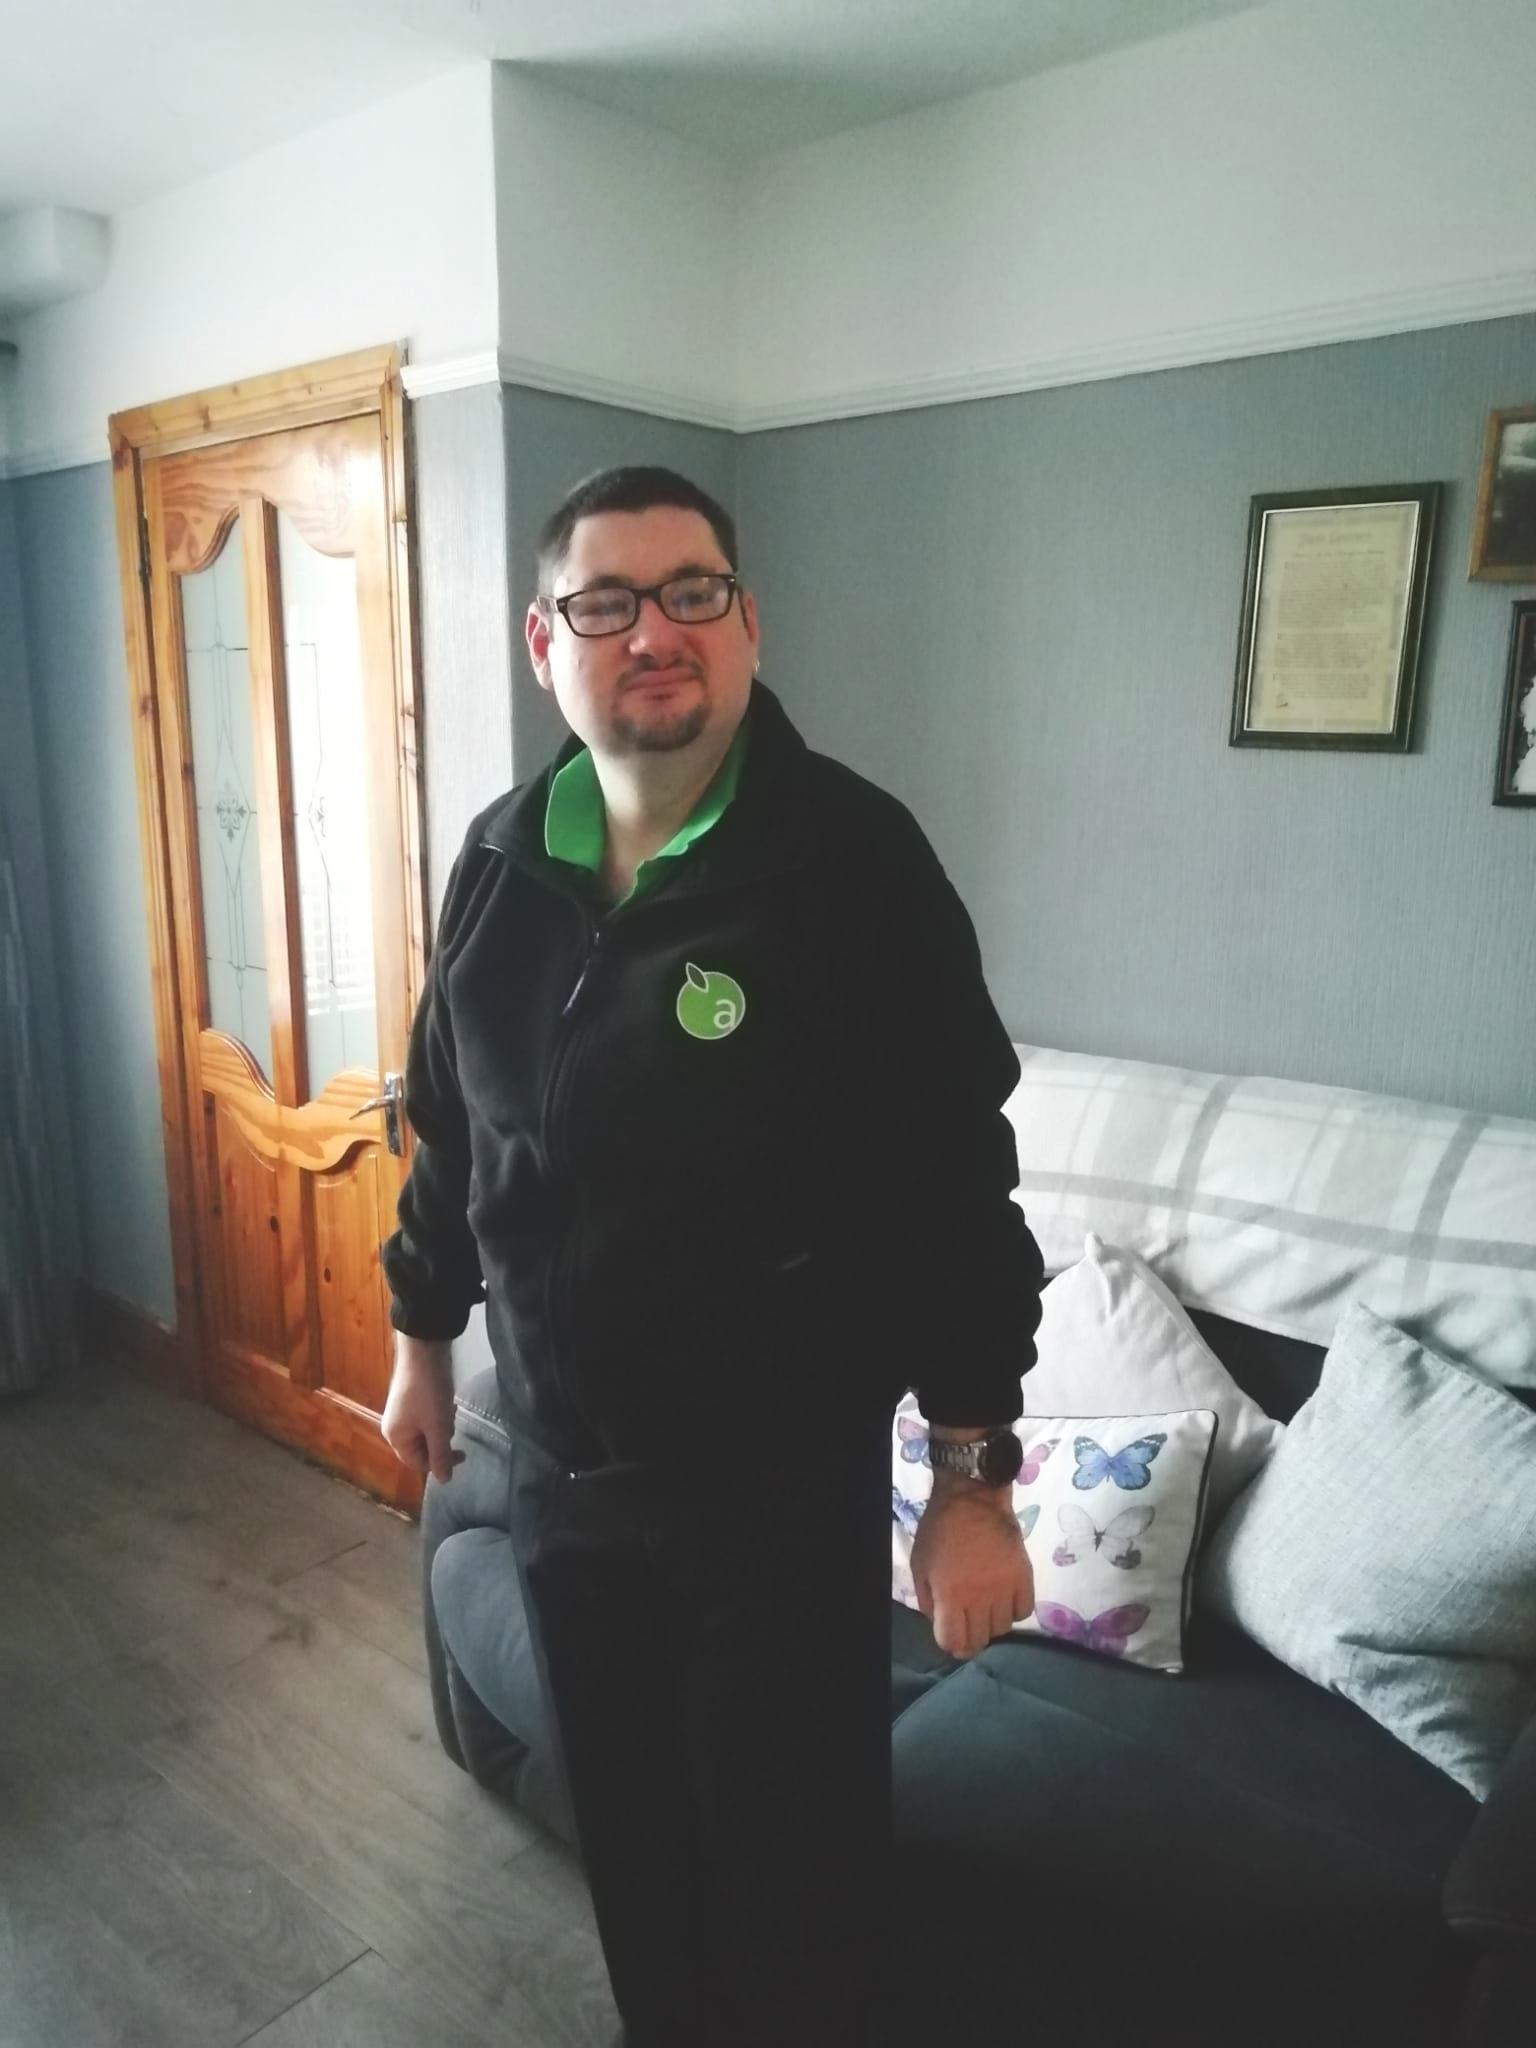 The image shows Luke Mannering getting ready for a shift at Applegree, wearing his black Applegreen uniform, he is standing in his living room, smiling. 